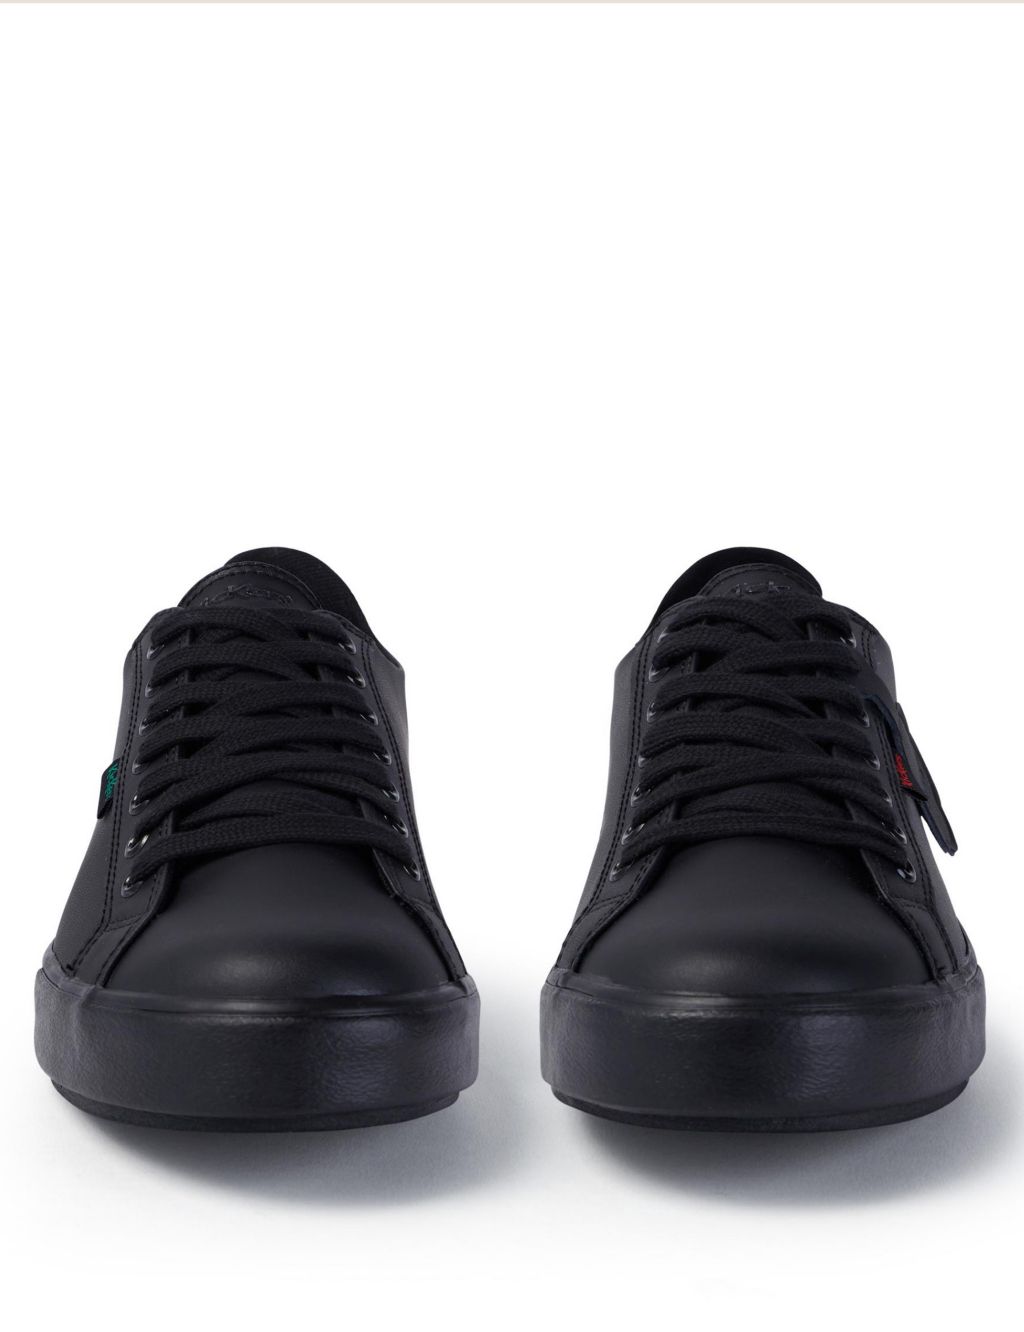 Leather Lace Up Trainers image 3